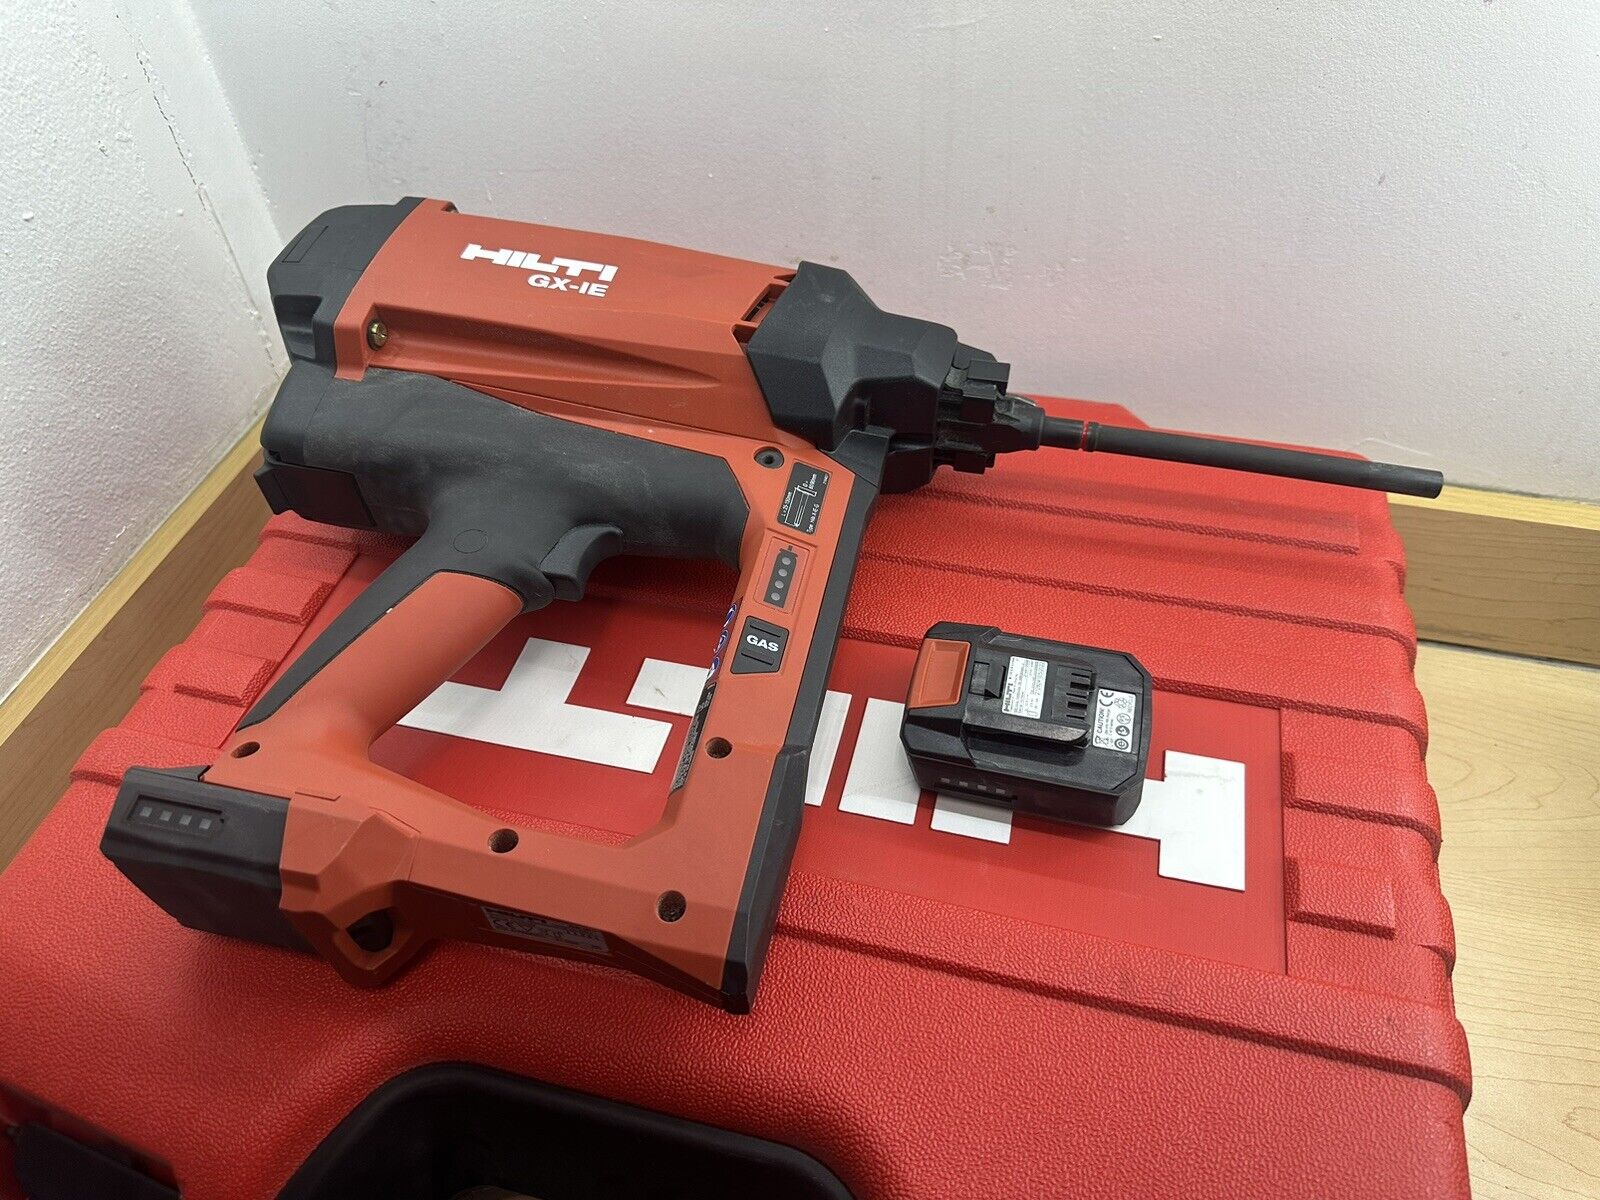 HILTI GX-IE GAS-ACTUATED INSULATION NAILER direct fastening tool for insulation